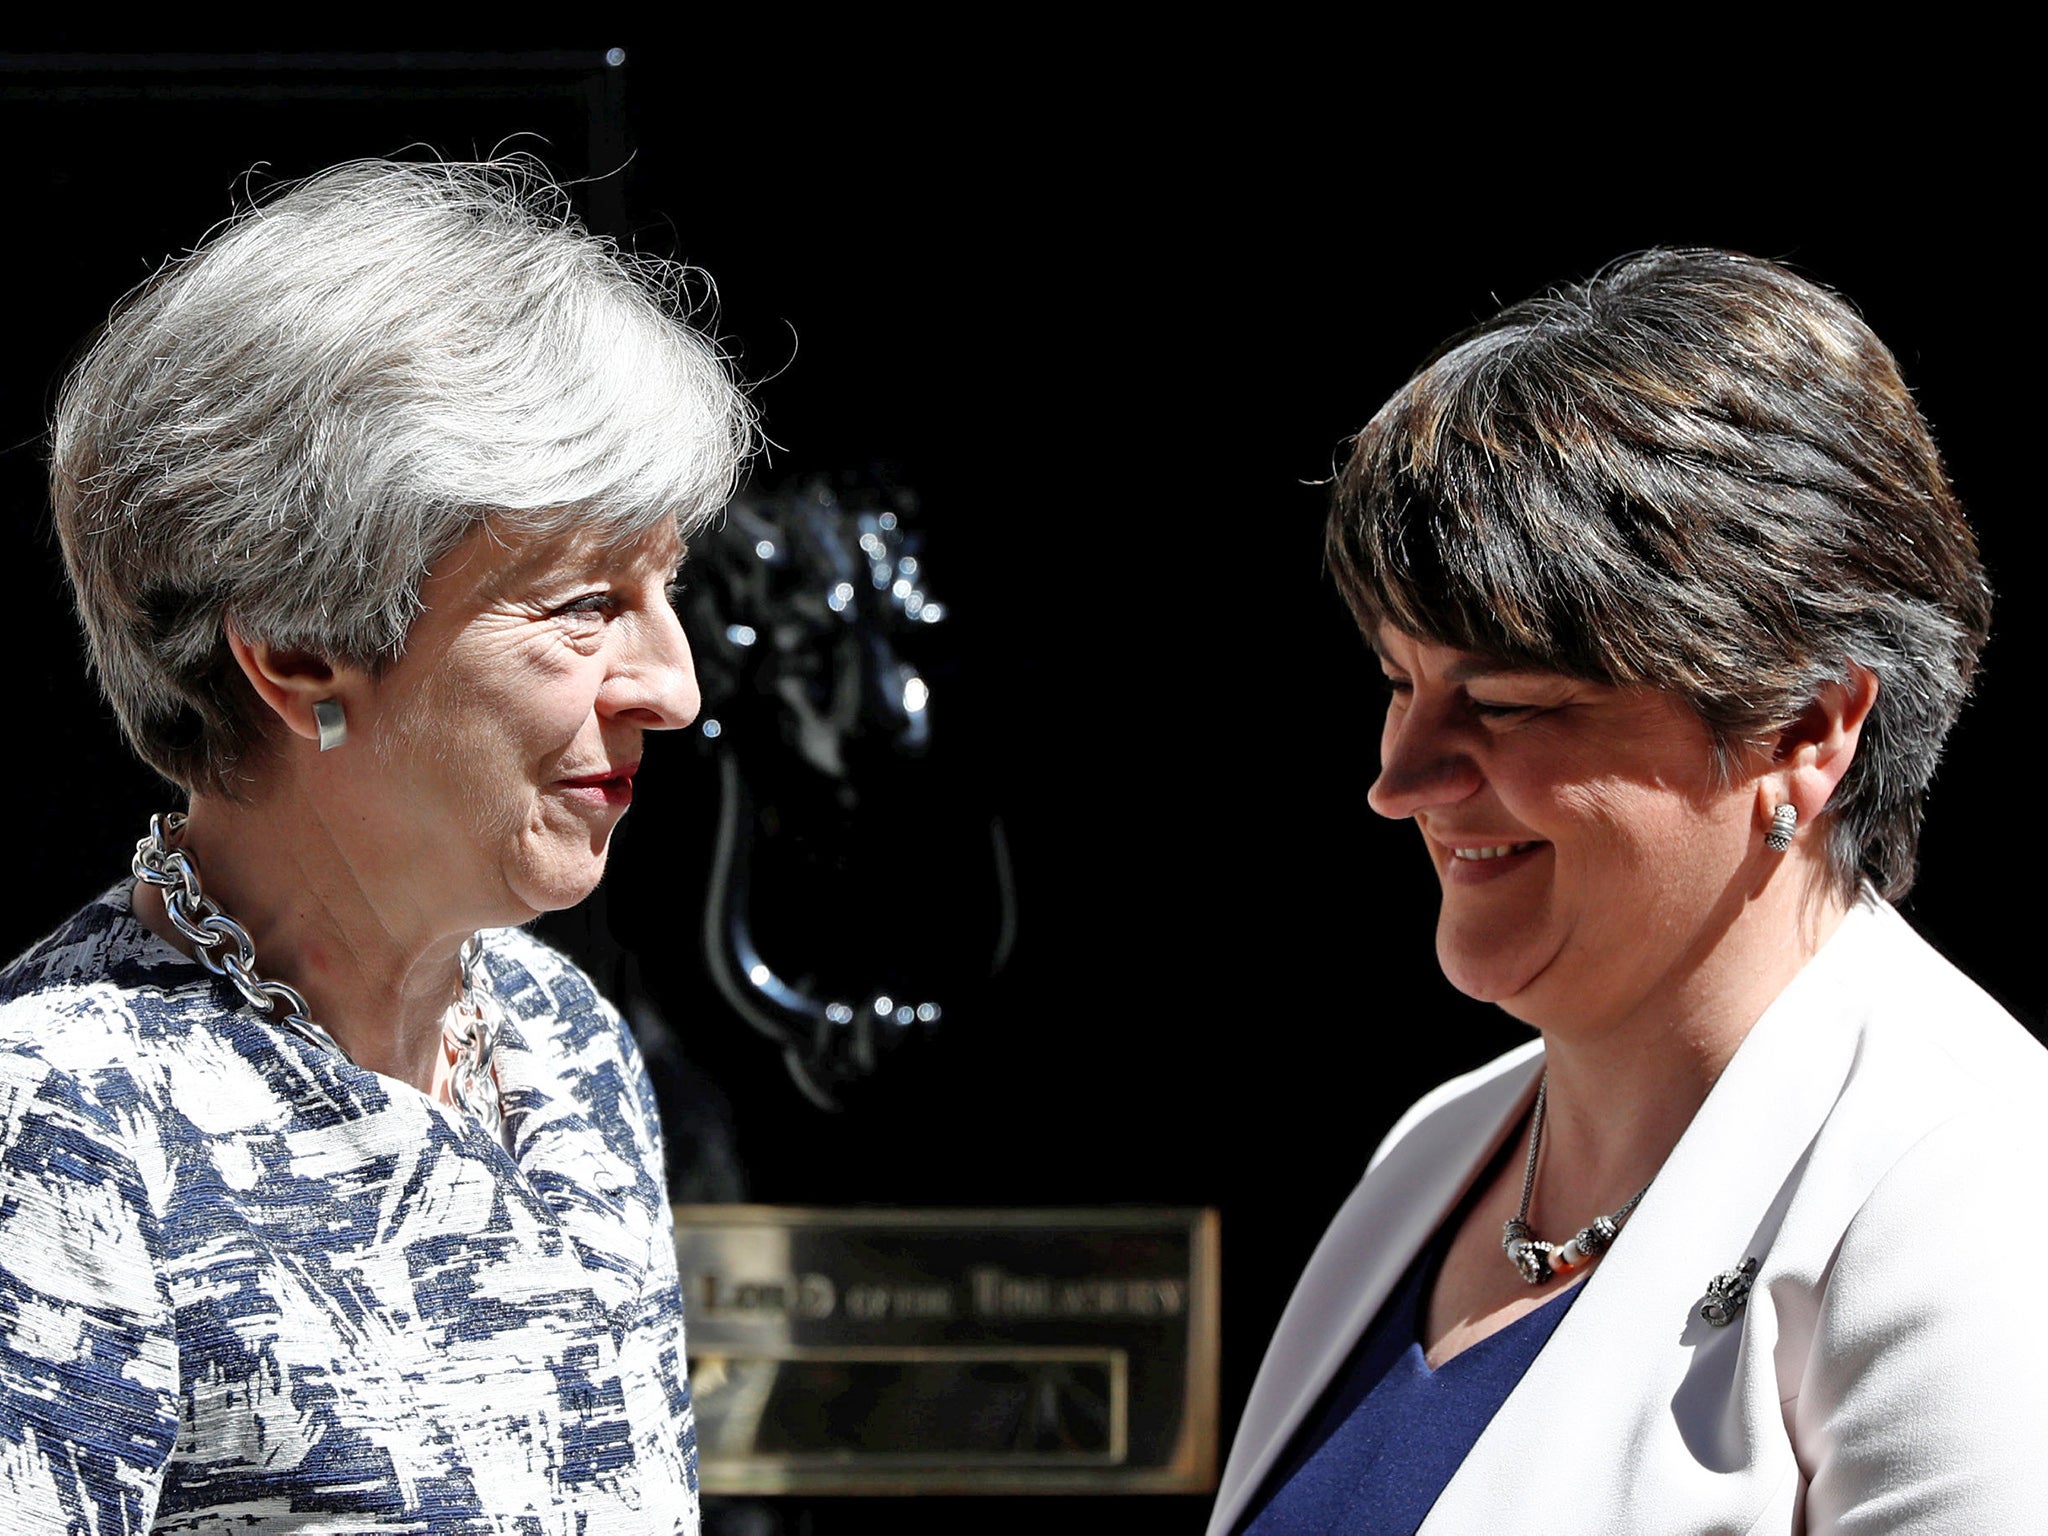 All smiles: Theresa May with DUP leader Arlene Foster outside Number 10